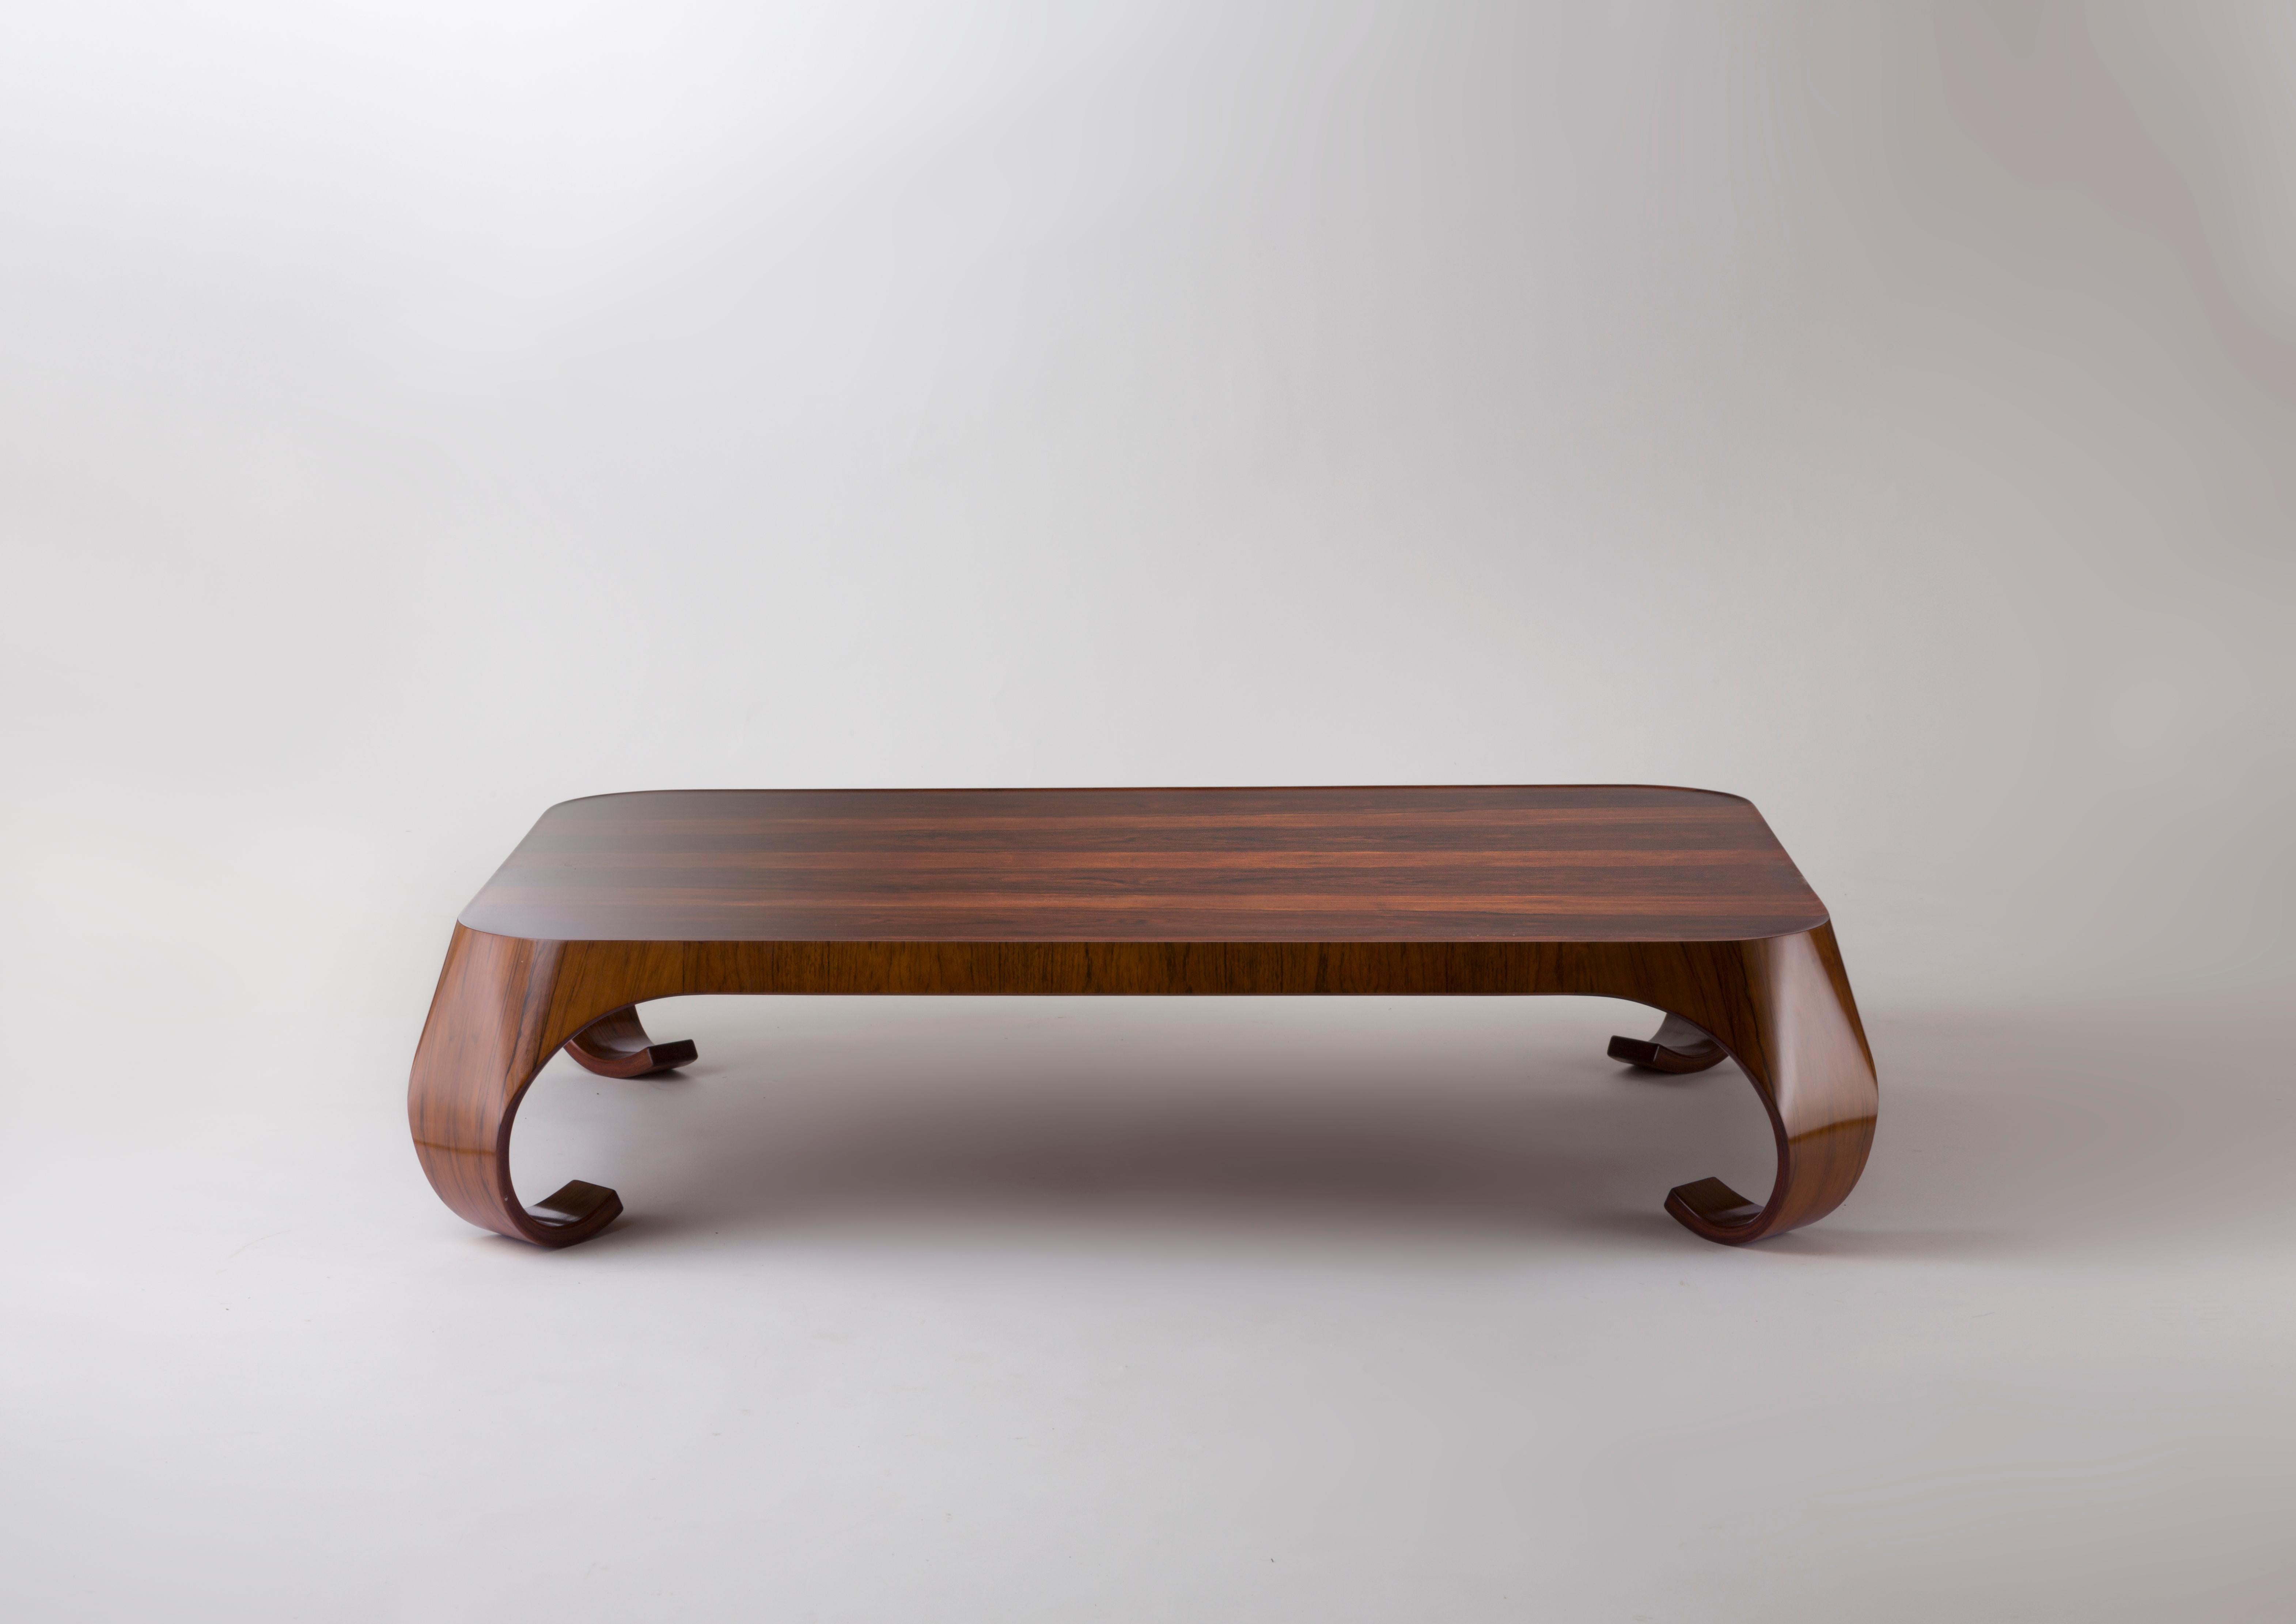 A coffee table by the Japanese designer Isamu Kenmochi (1912-1971), in wood, manufactured by Tendo Mokko, Japan, circa 1965.